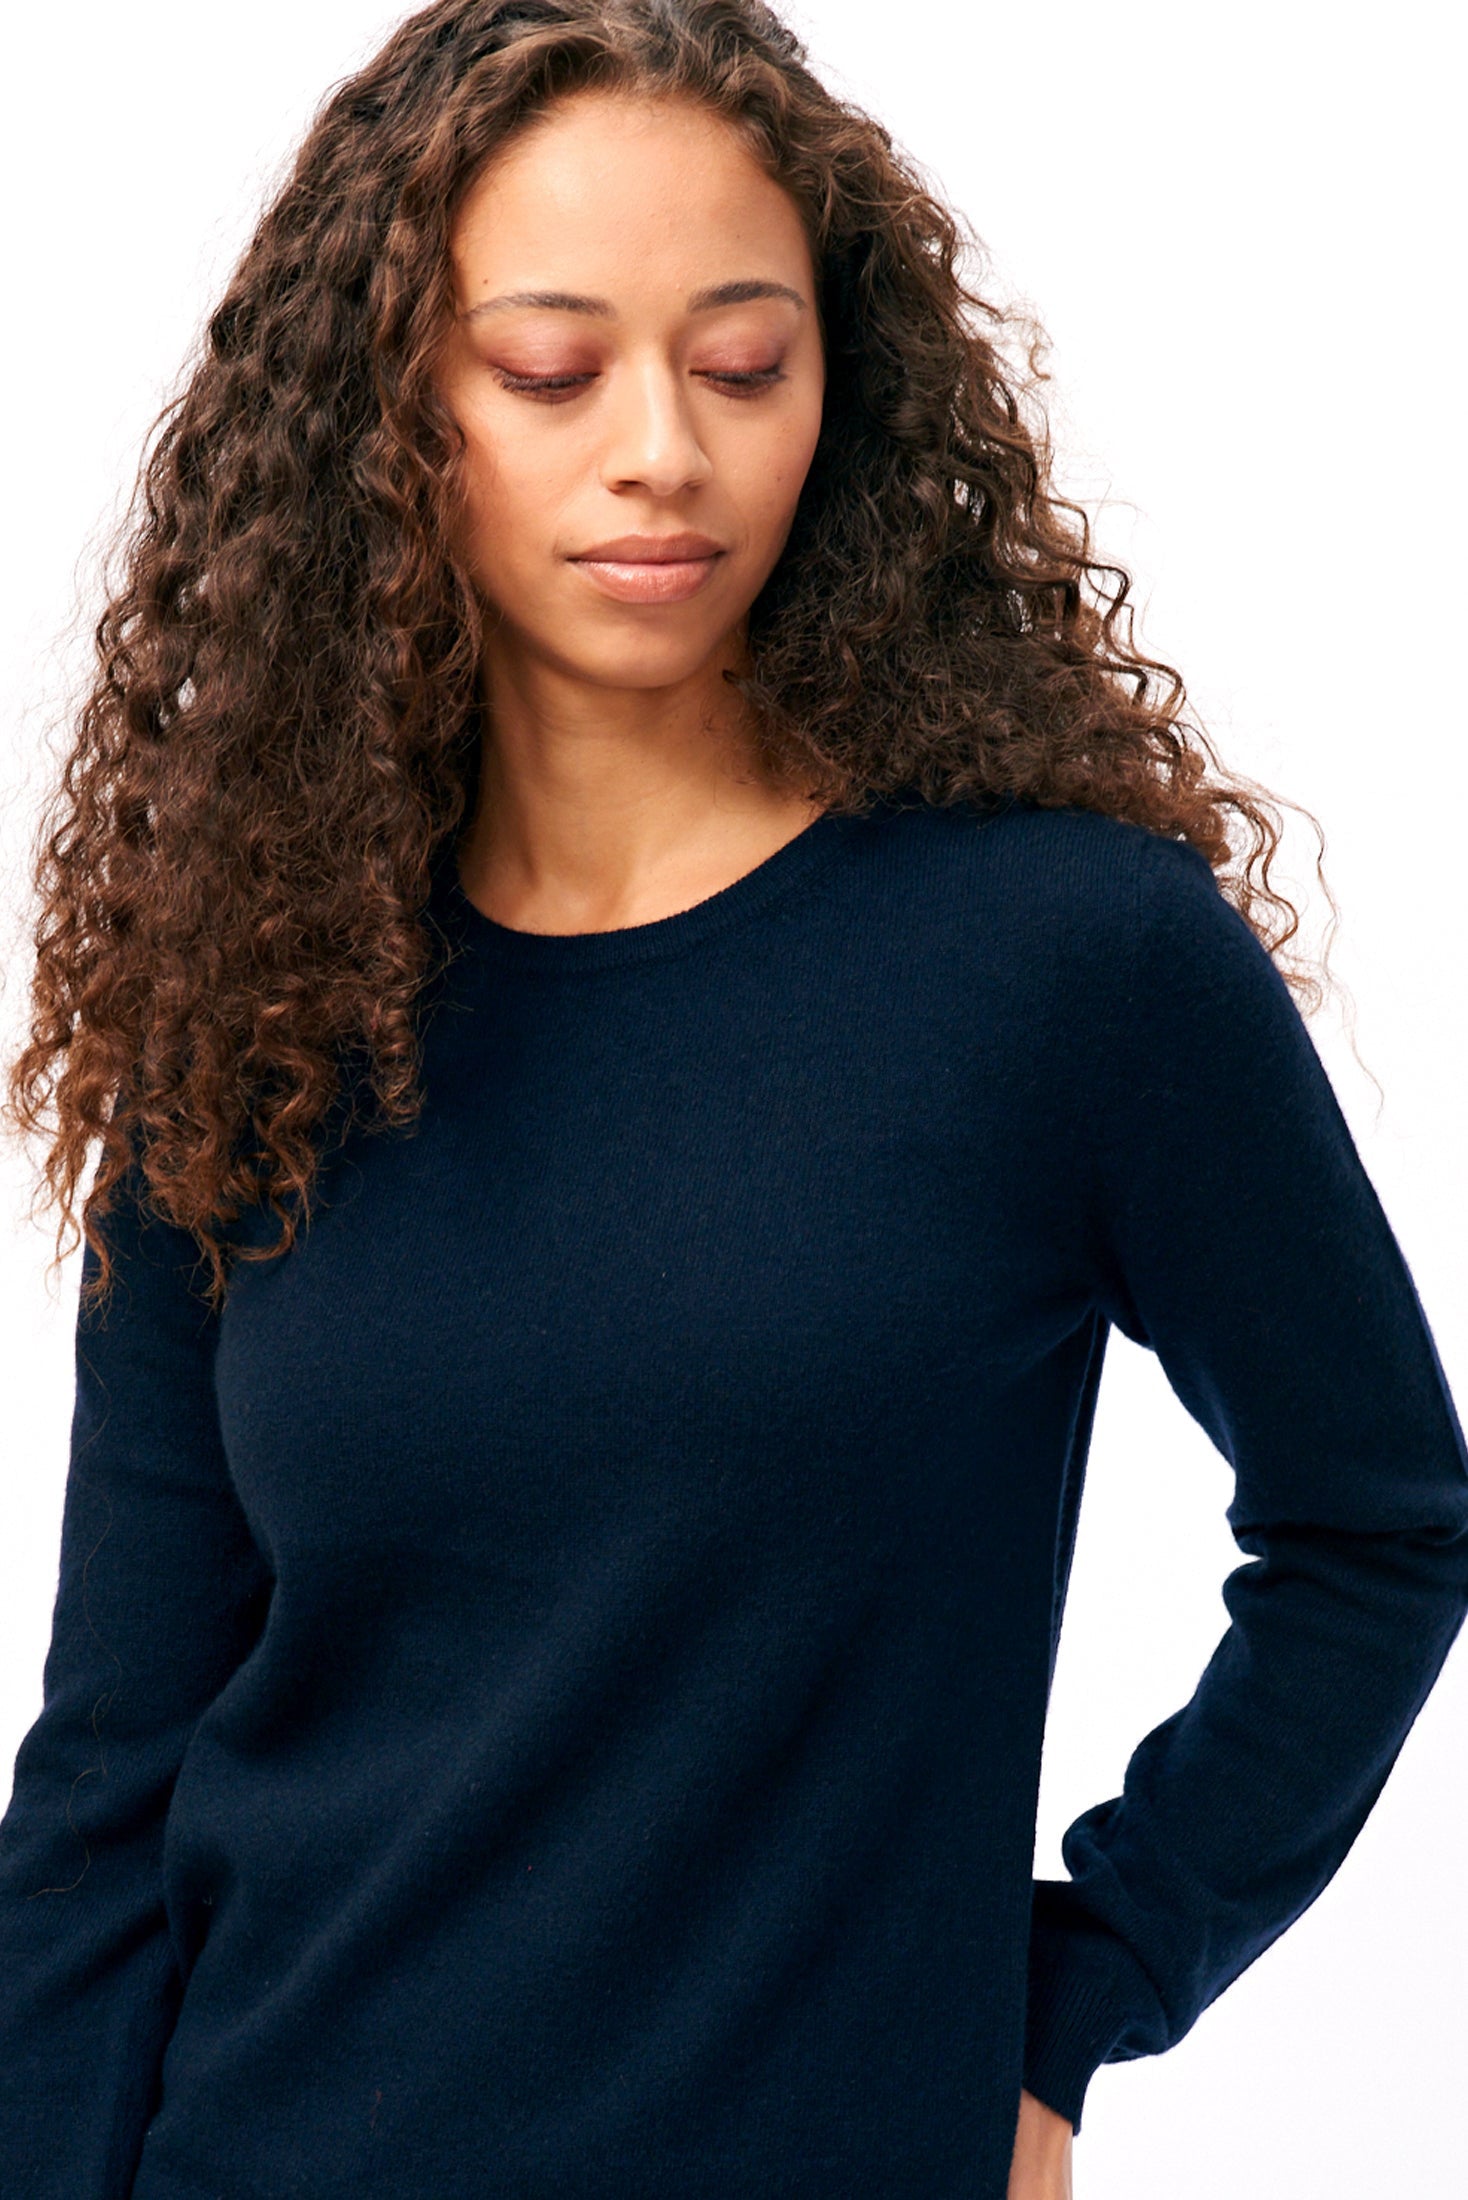 Brown haired female model wearing Jumper1234 cashmere crew in navy